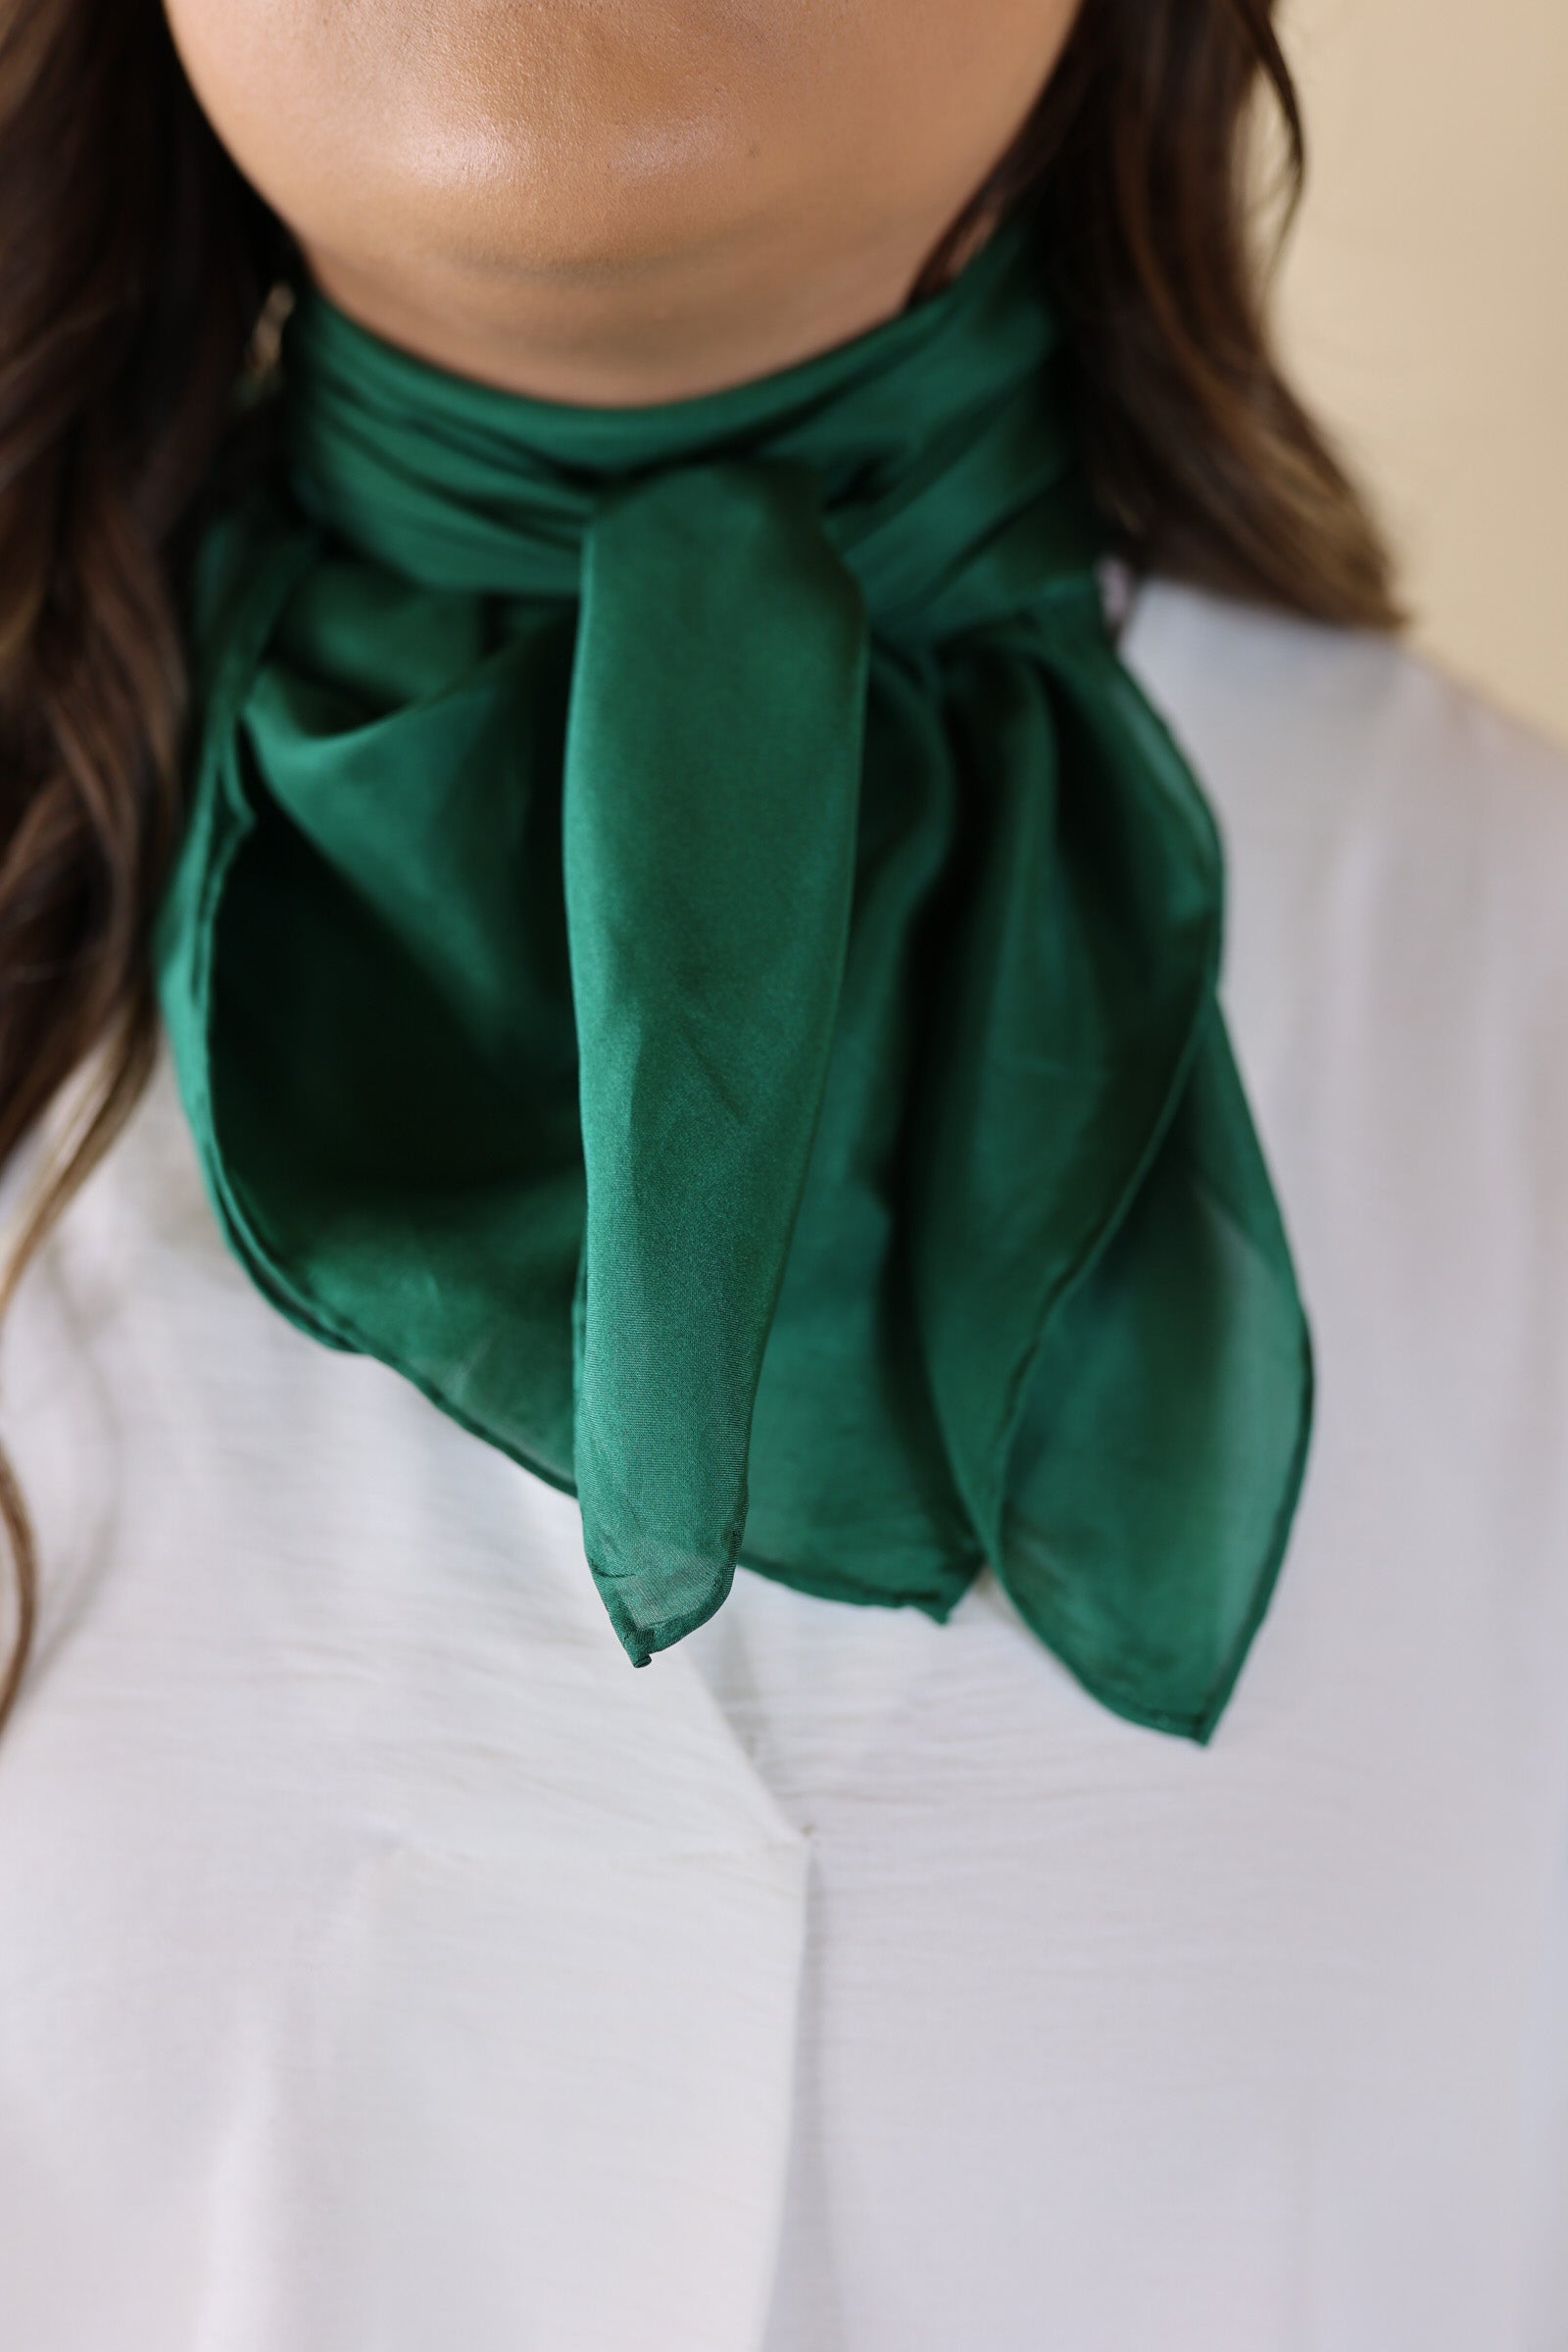 Solid Wild Rag in Forest Green - Giddy Up Glamour Boutique